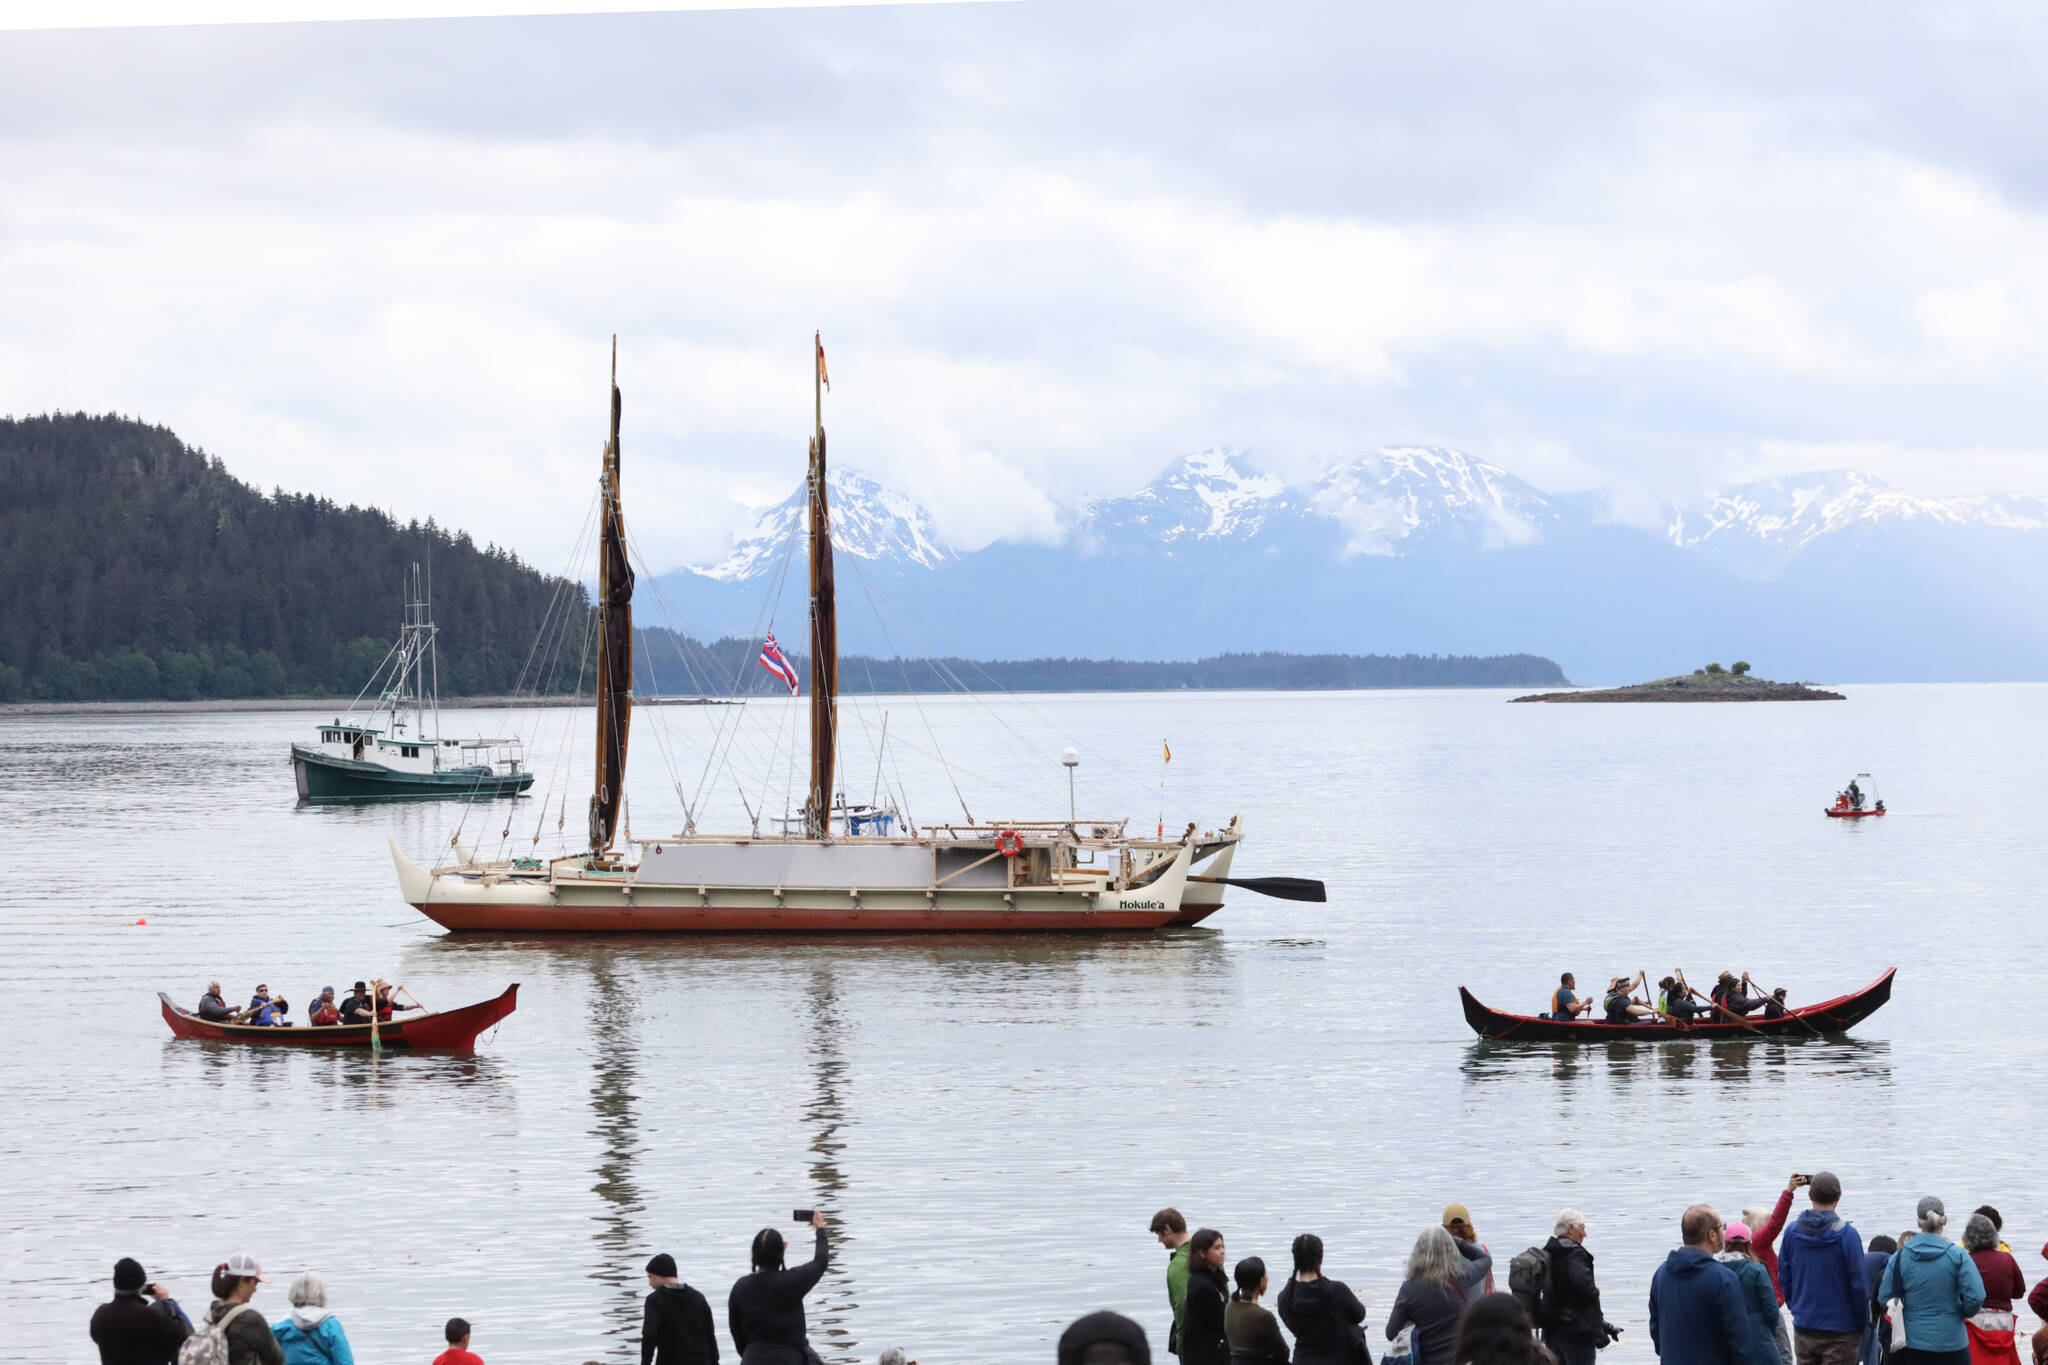 A crowd gathers at the shore of Auke Bay as the Hōkūle‘a, a double-hulled and wind-powered traditional Polynesian voyaging canoe, arrives in Juneau on Saturday afternoon for a welcoming ceremony. (Clarise Larson / Juneau Empire)